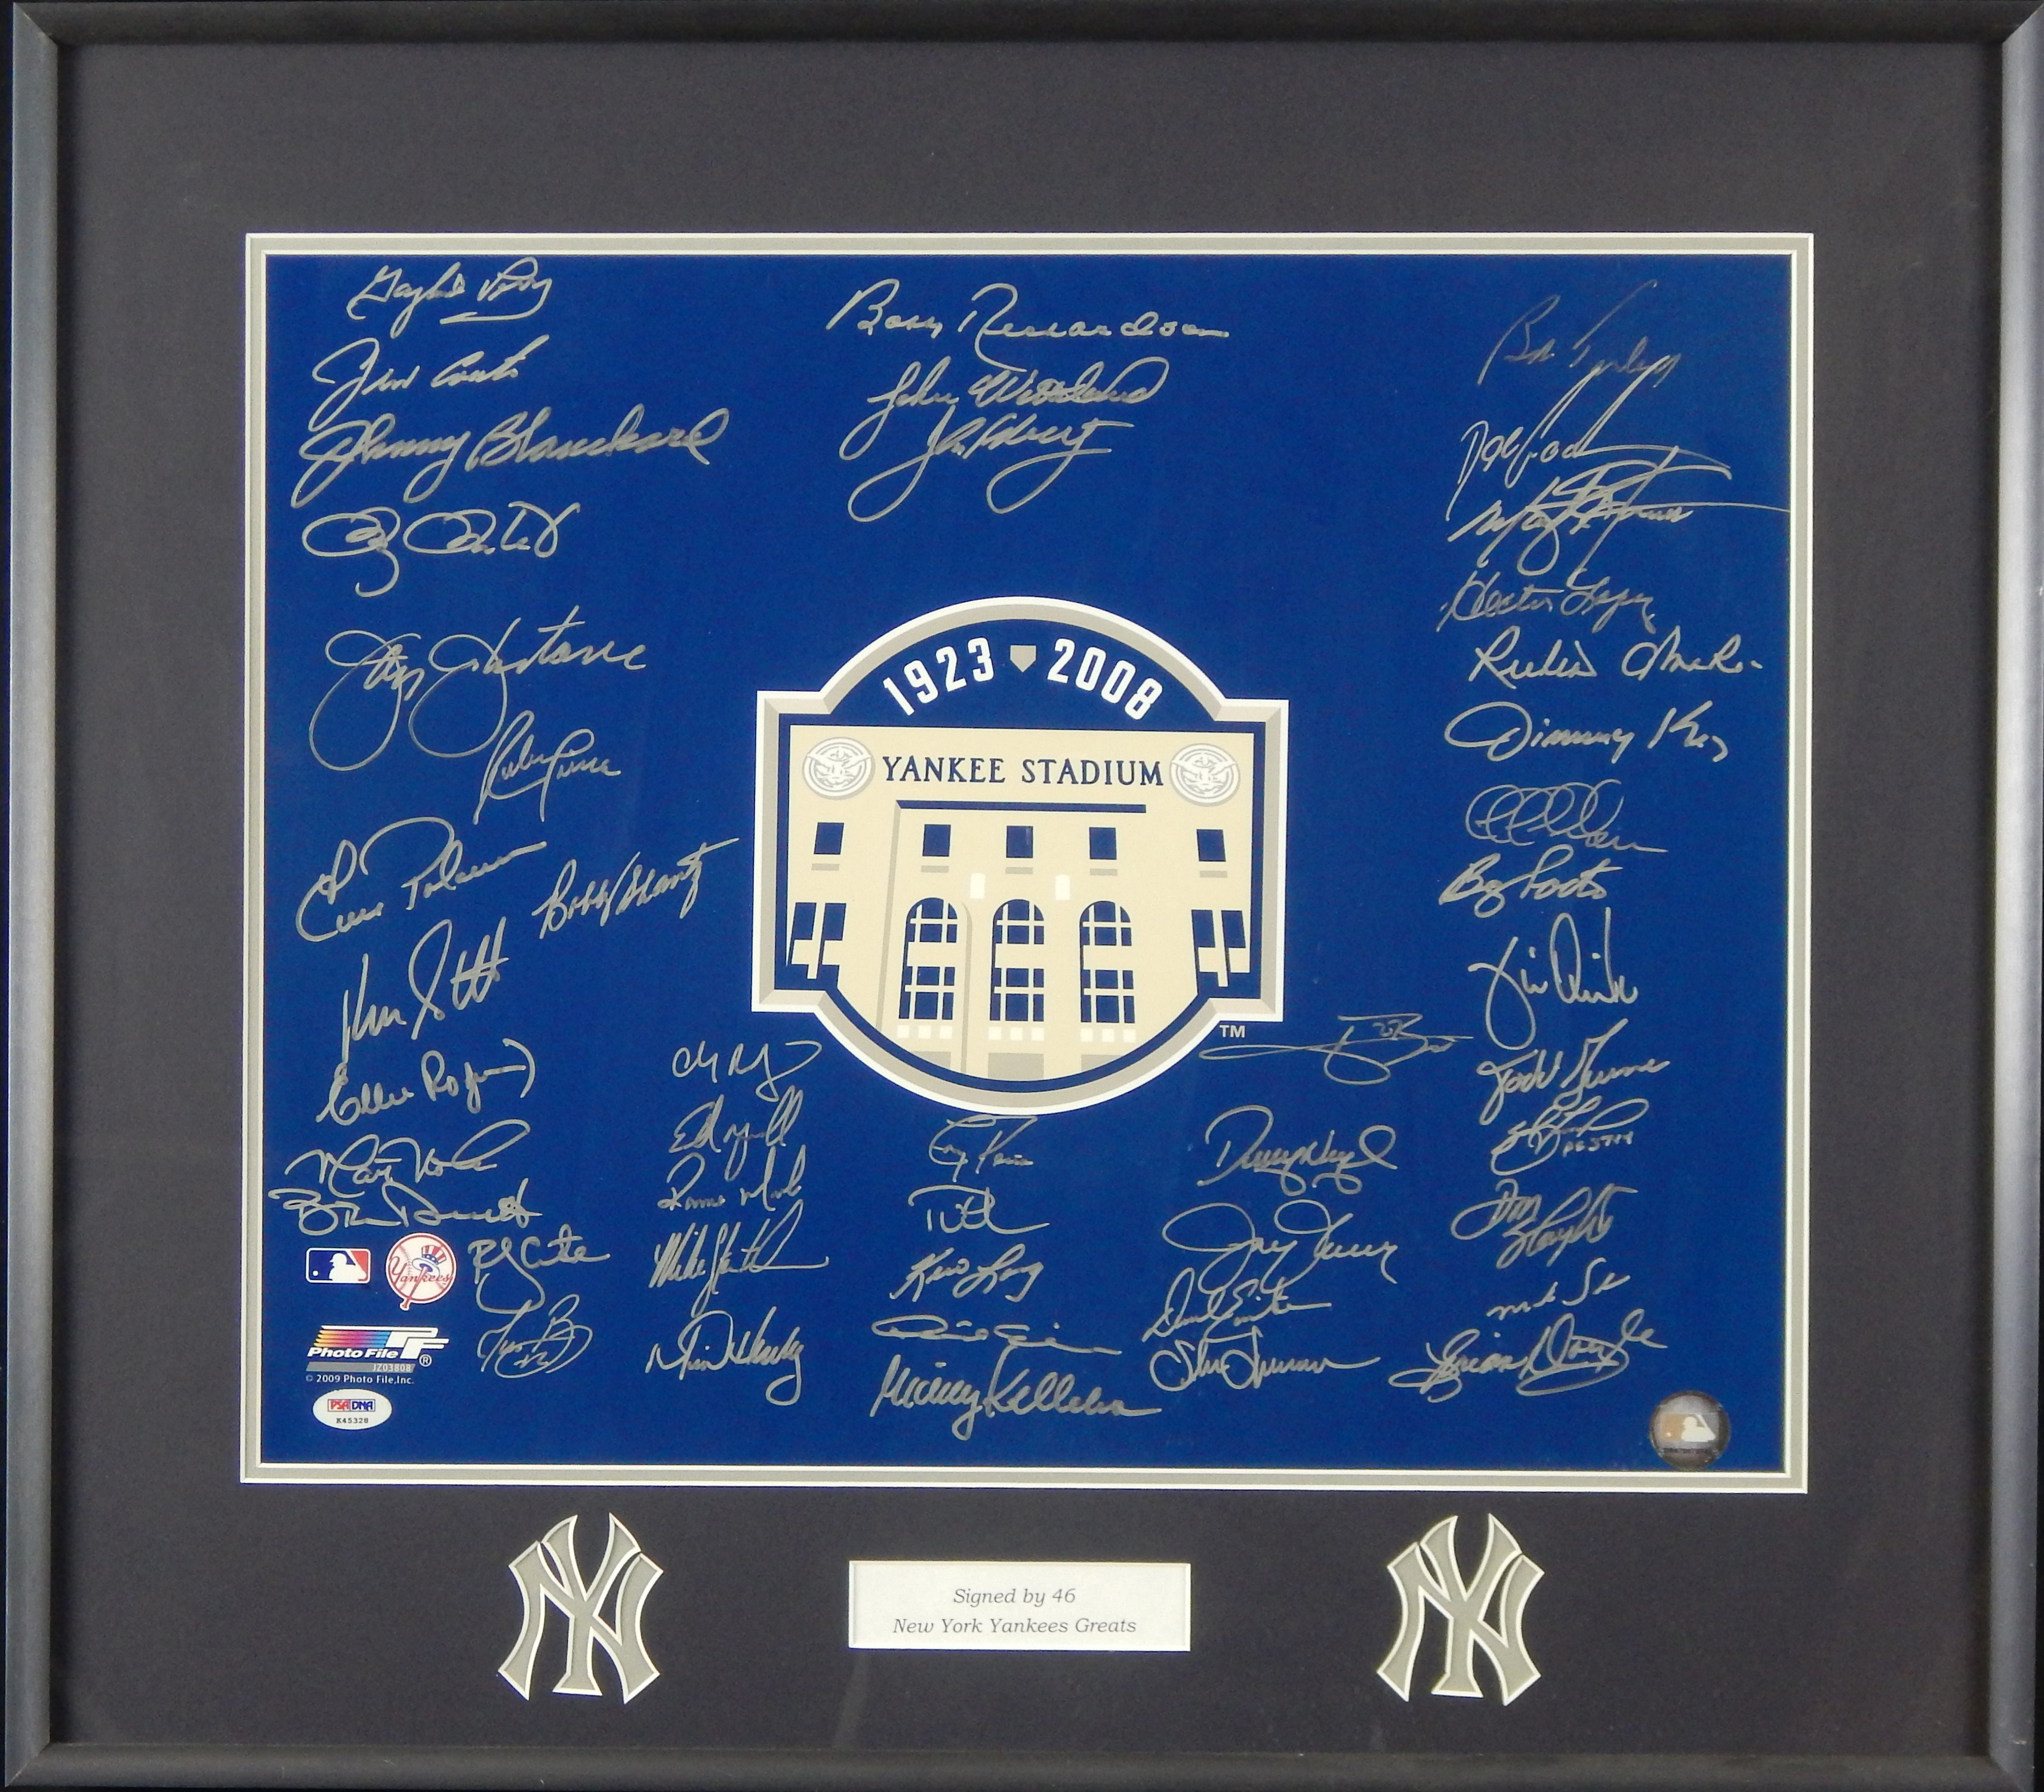 - 2008 New York Yankees Greats Signed Photo (PSA/DNA)